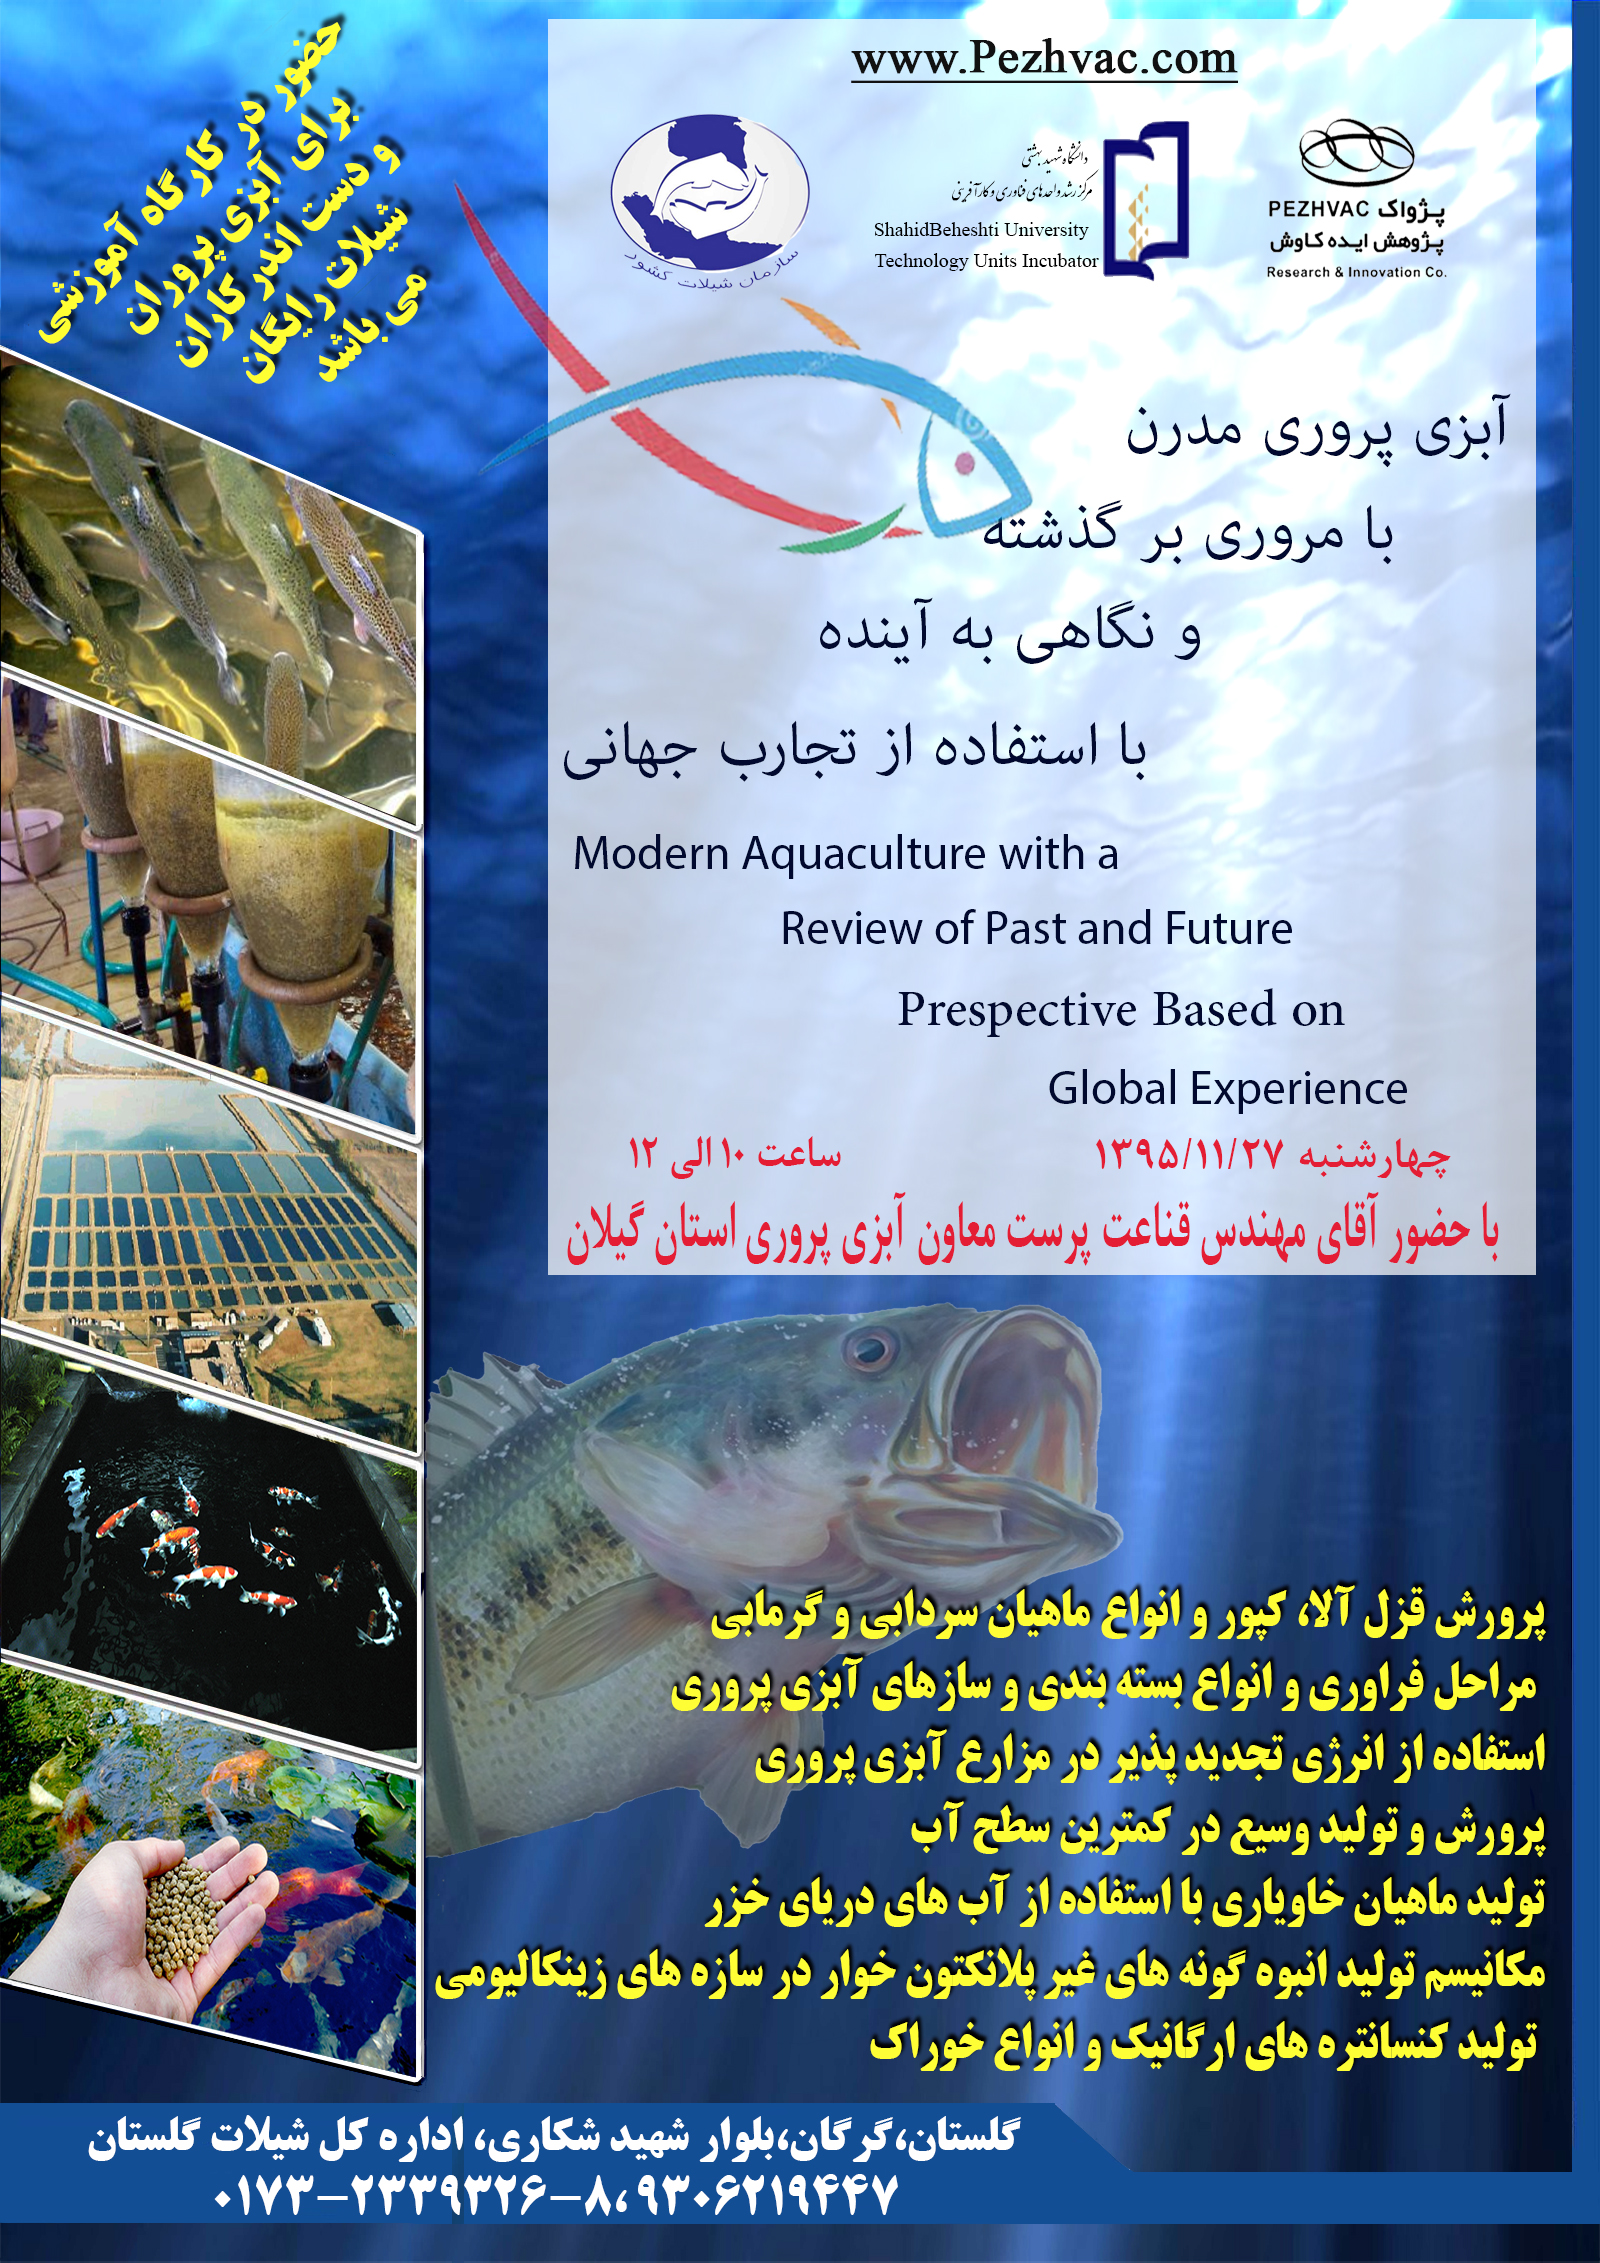 Workshop on modern aquaculture with a review of the past and a look at the future using global experiences (Jun 2017)